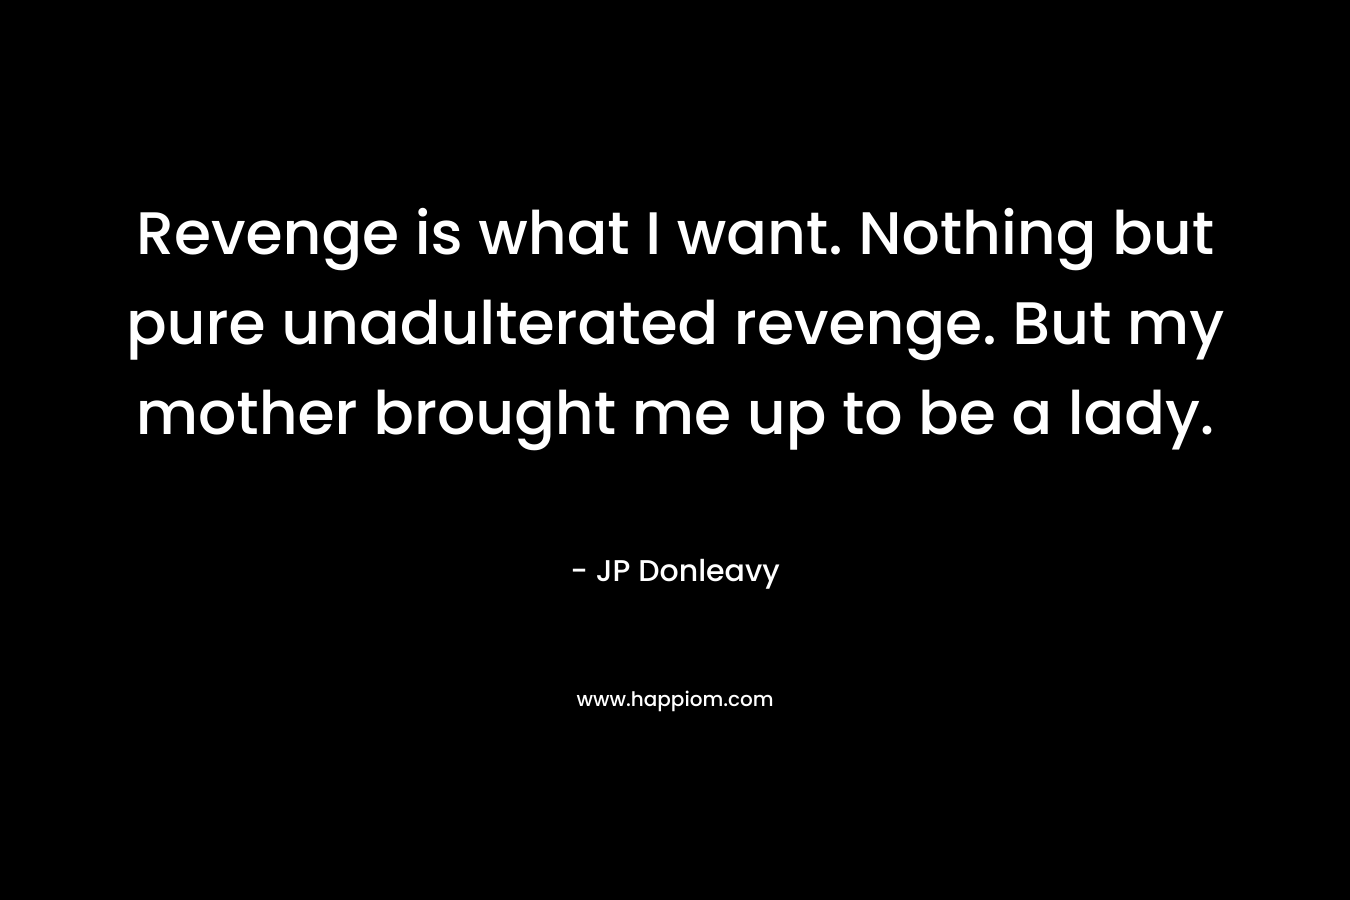 Revenge is what I want. Nothing but pure unadulterated revenge. But my mother brought me up to be a lady. – JP Donleavy